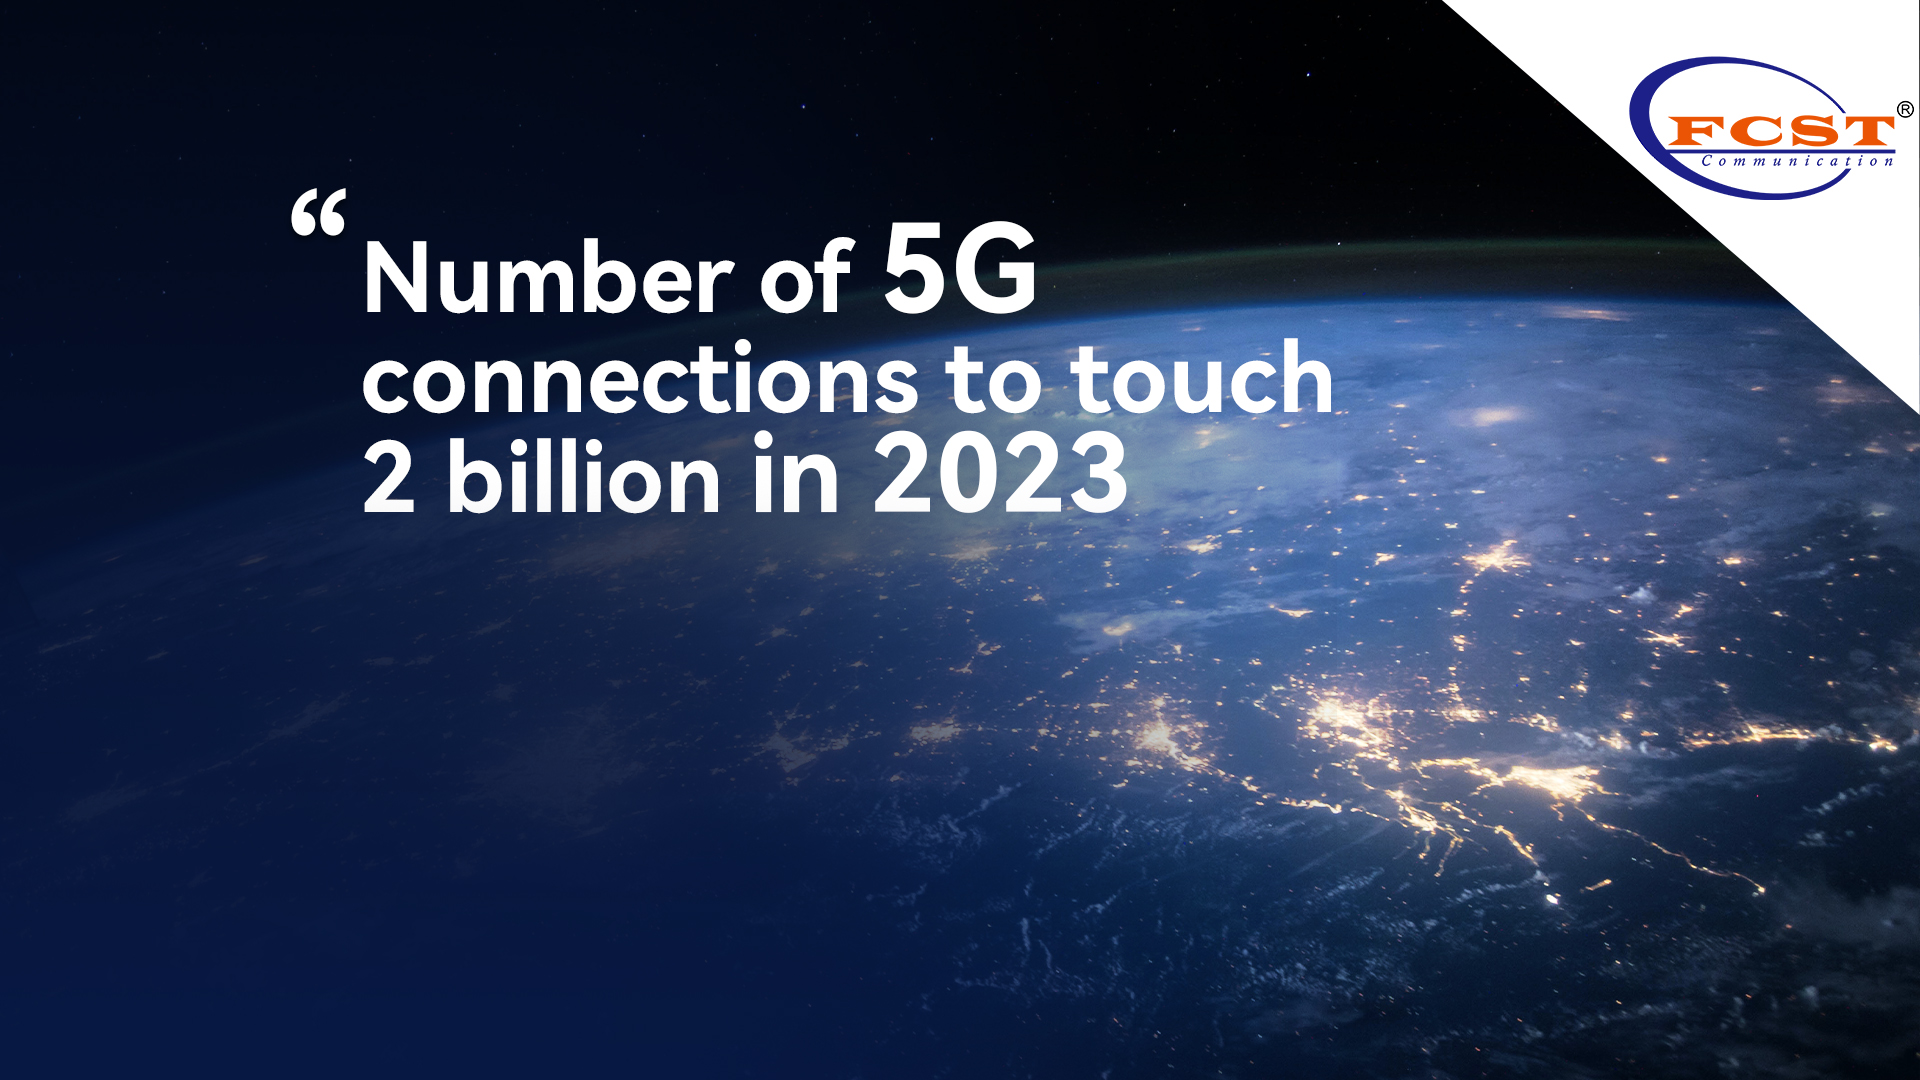 Number of 5G connections to touch 2 billion in 2023